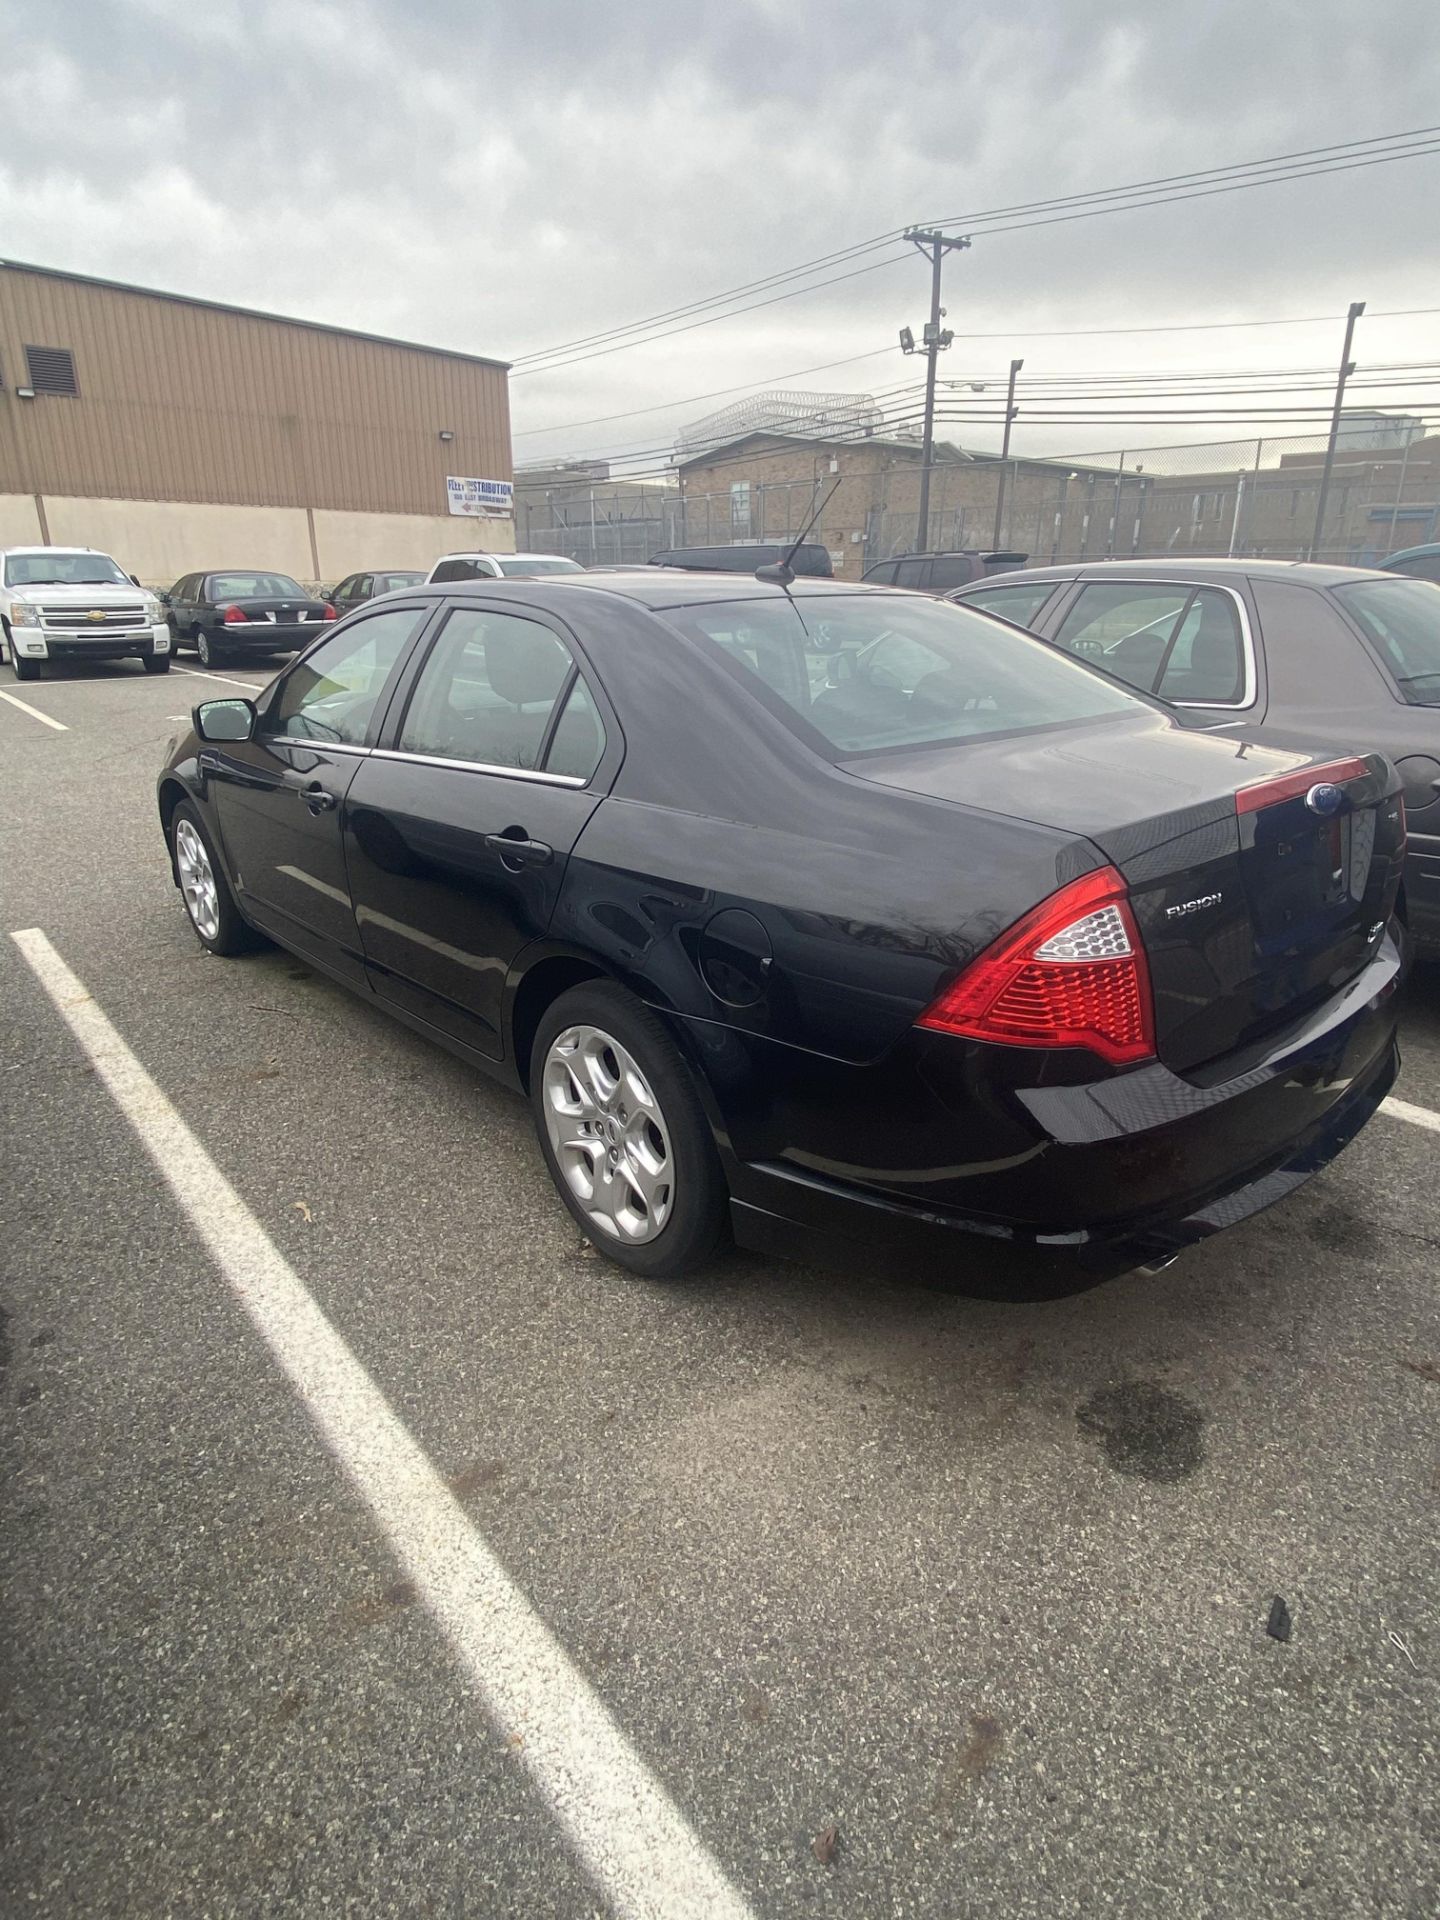 2010 FORD Fusion, VIN: 3FAHP0HG8AR196762, ~ 85,850 Miles - Image 2 of 4